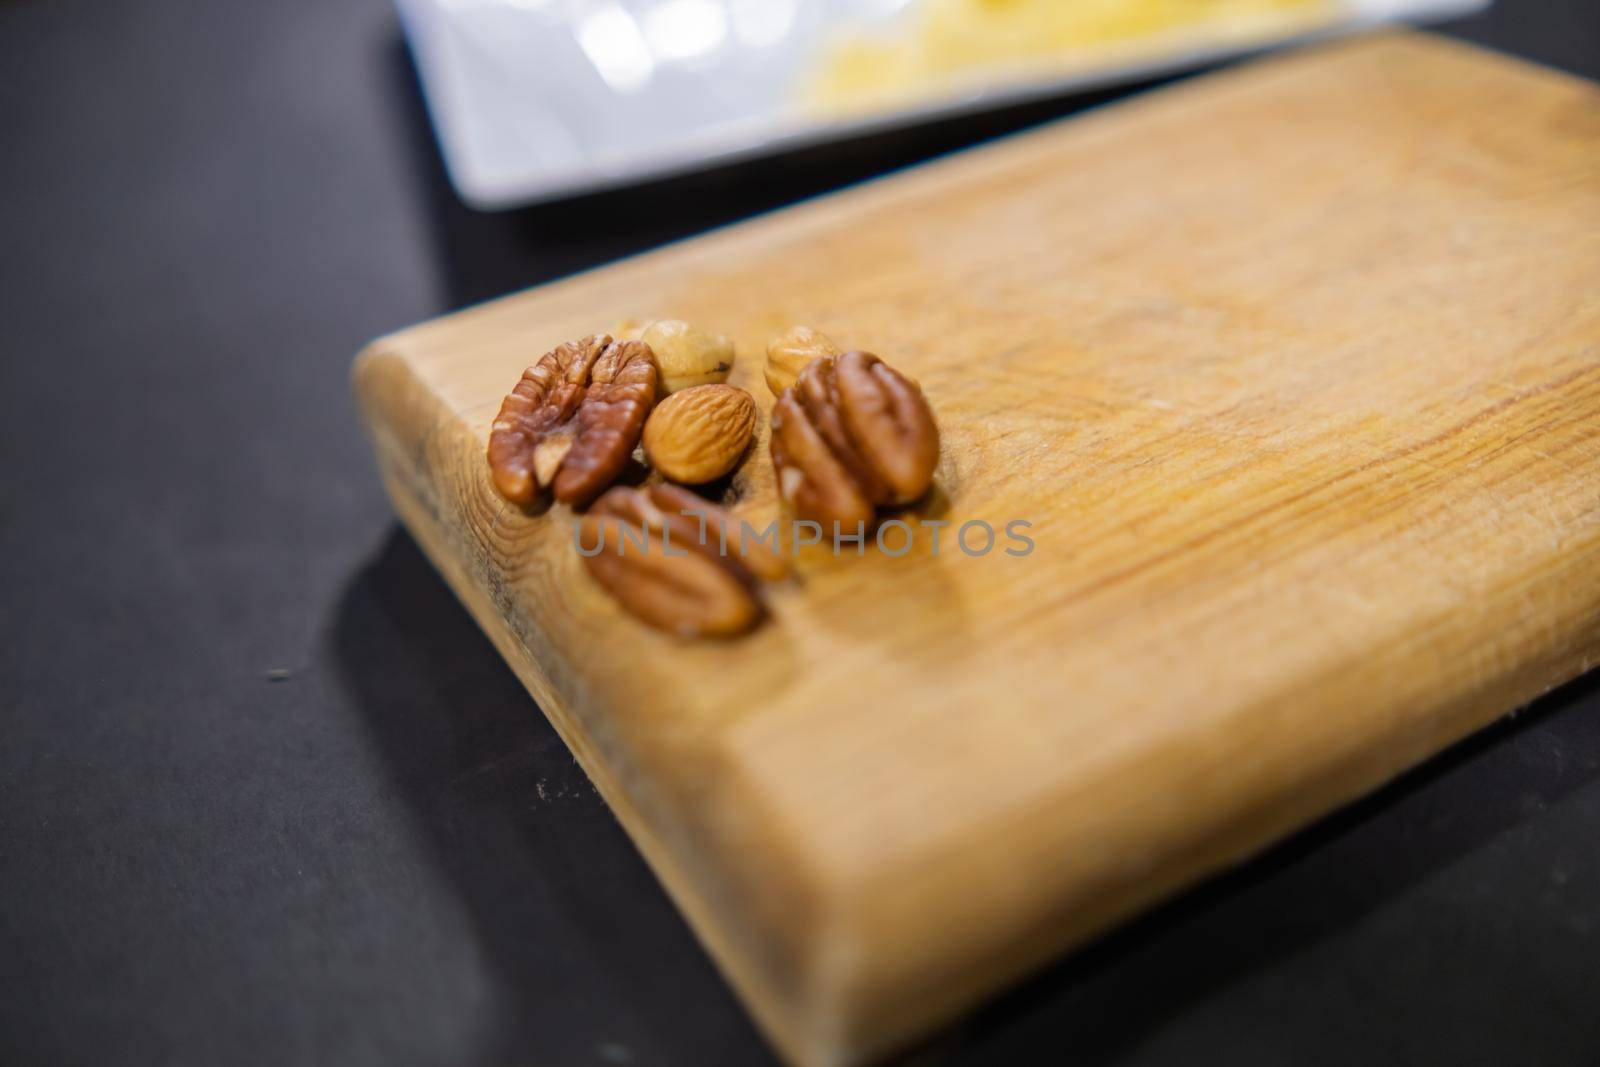 Walnuts, almonds, and Indian nuts on wooden cutting board by Kanelbulle